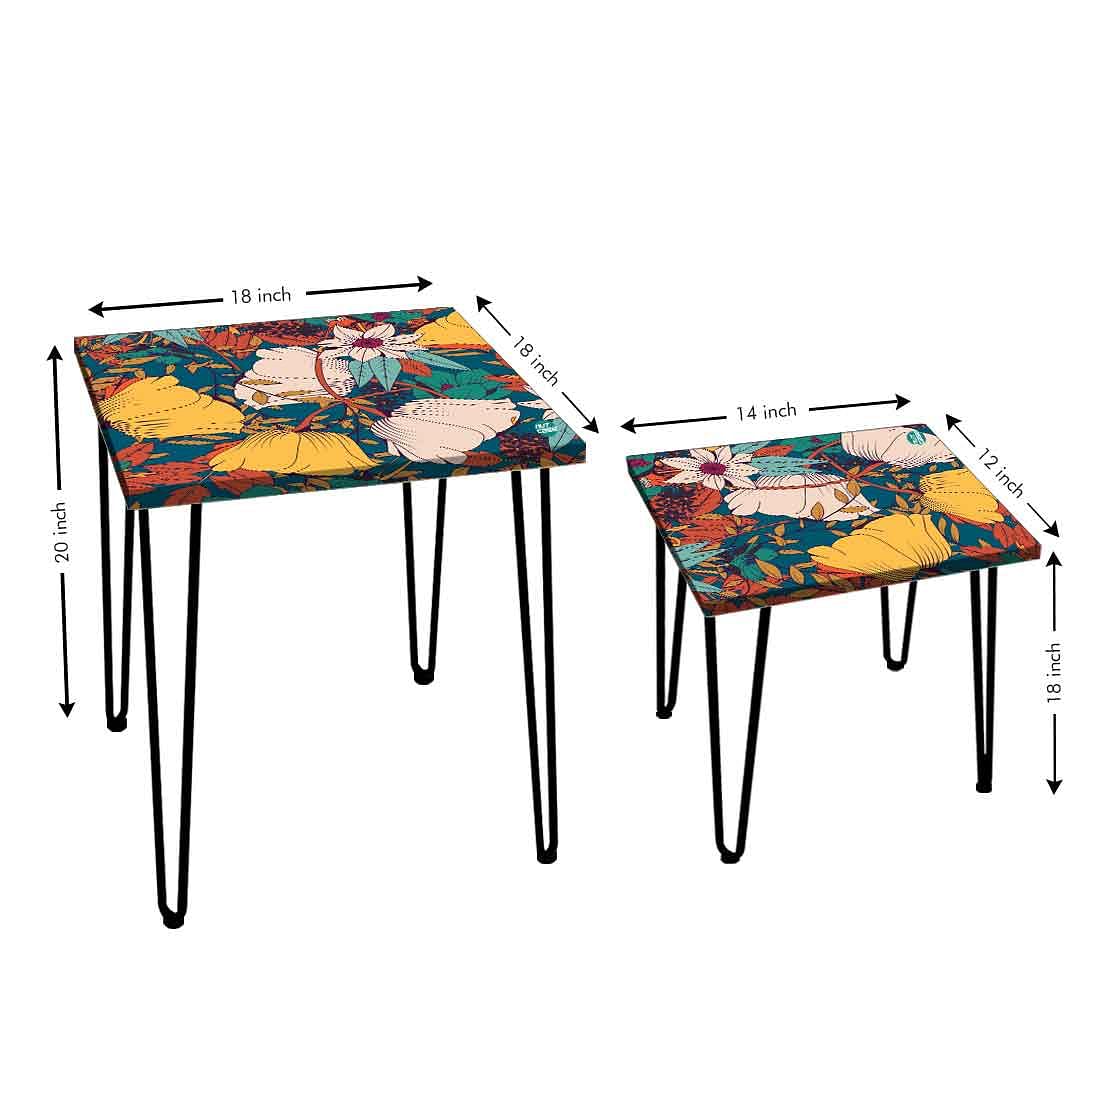 Designer Printed 2 Piece Nest Tables for Home Office and Outdoor - Yellow Flower Nutcase